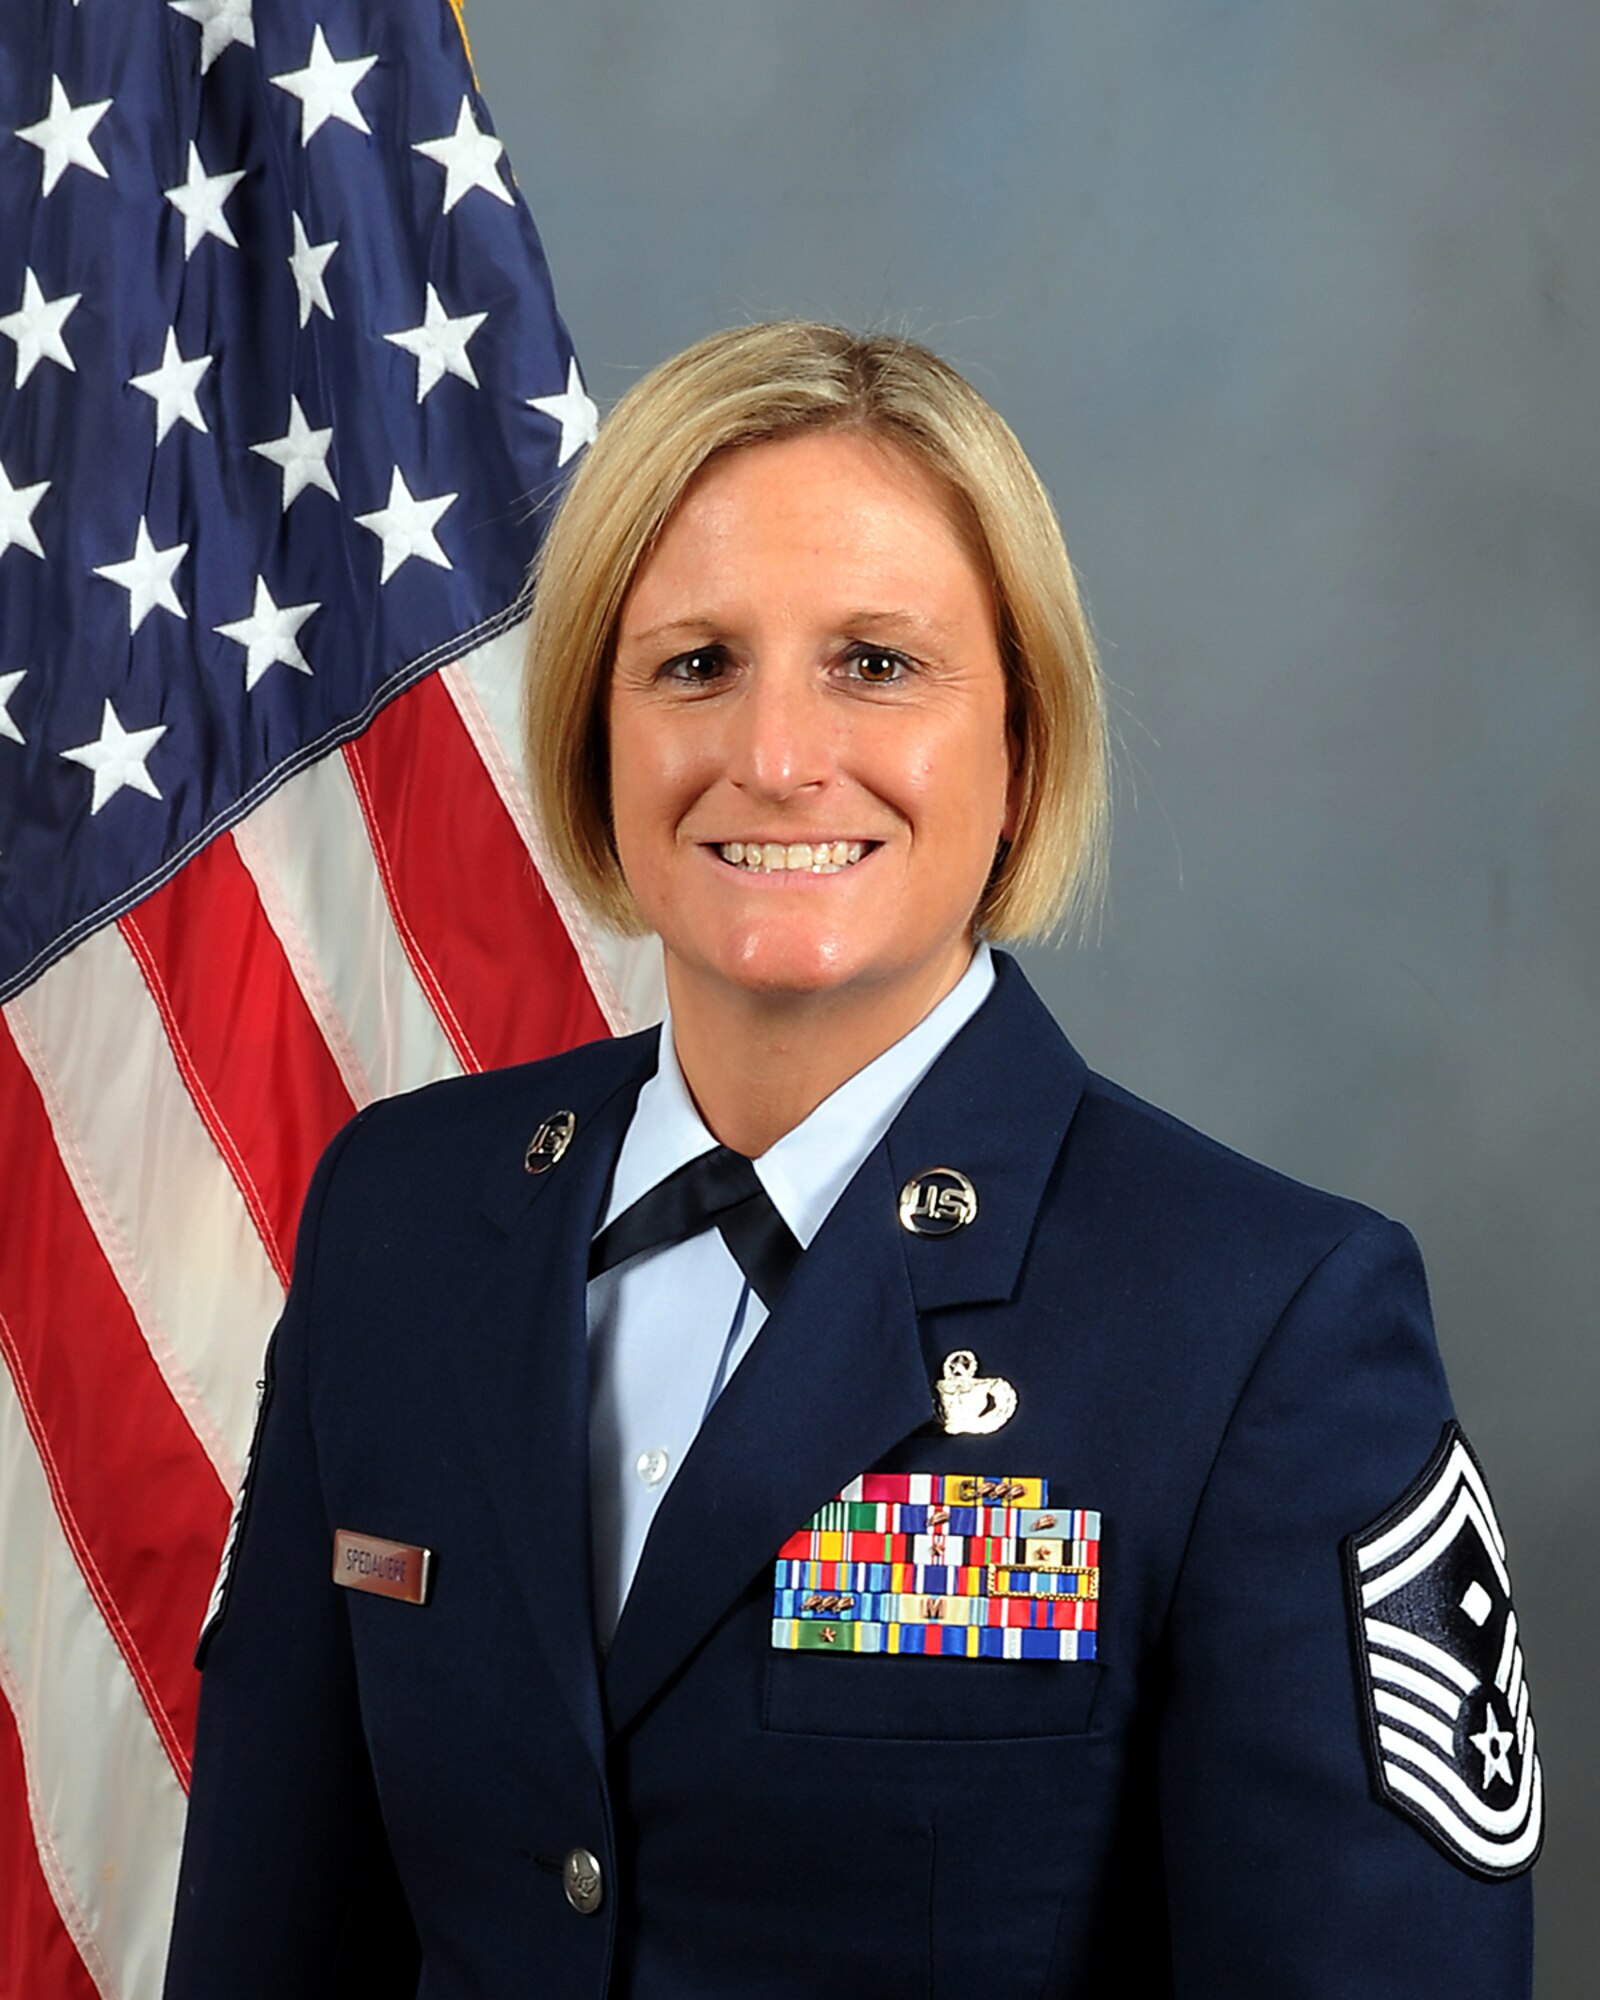 Air Force Reserve Command’s Outstanding First Sergeant of the Year is Senior Master Sgt. Rebekah J. Spedaliere, 514th Air Mobility Wing, Joint Base McGuire-Dix-Lakehurst, New Jersey. (U.S. Air Force photo)